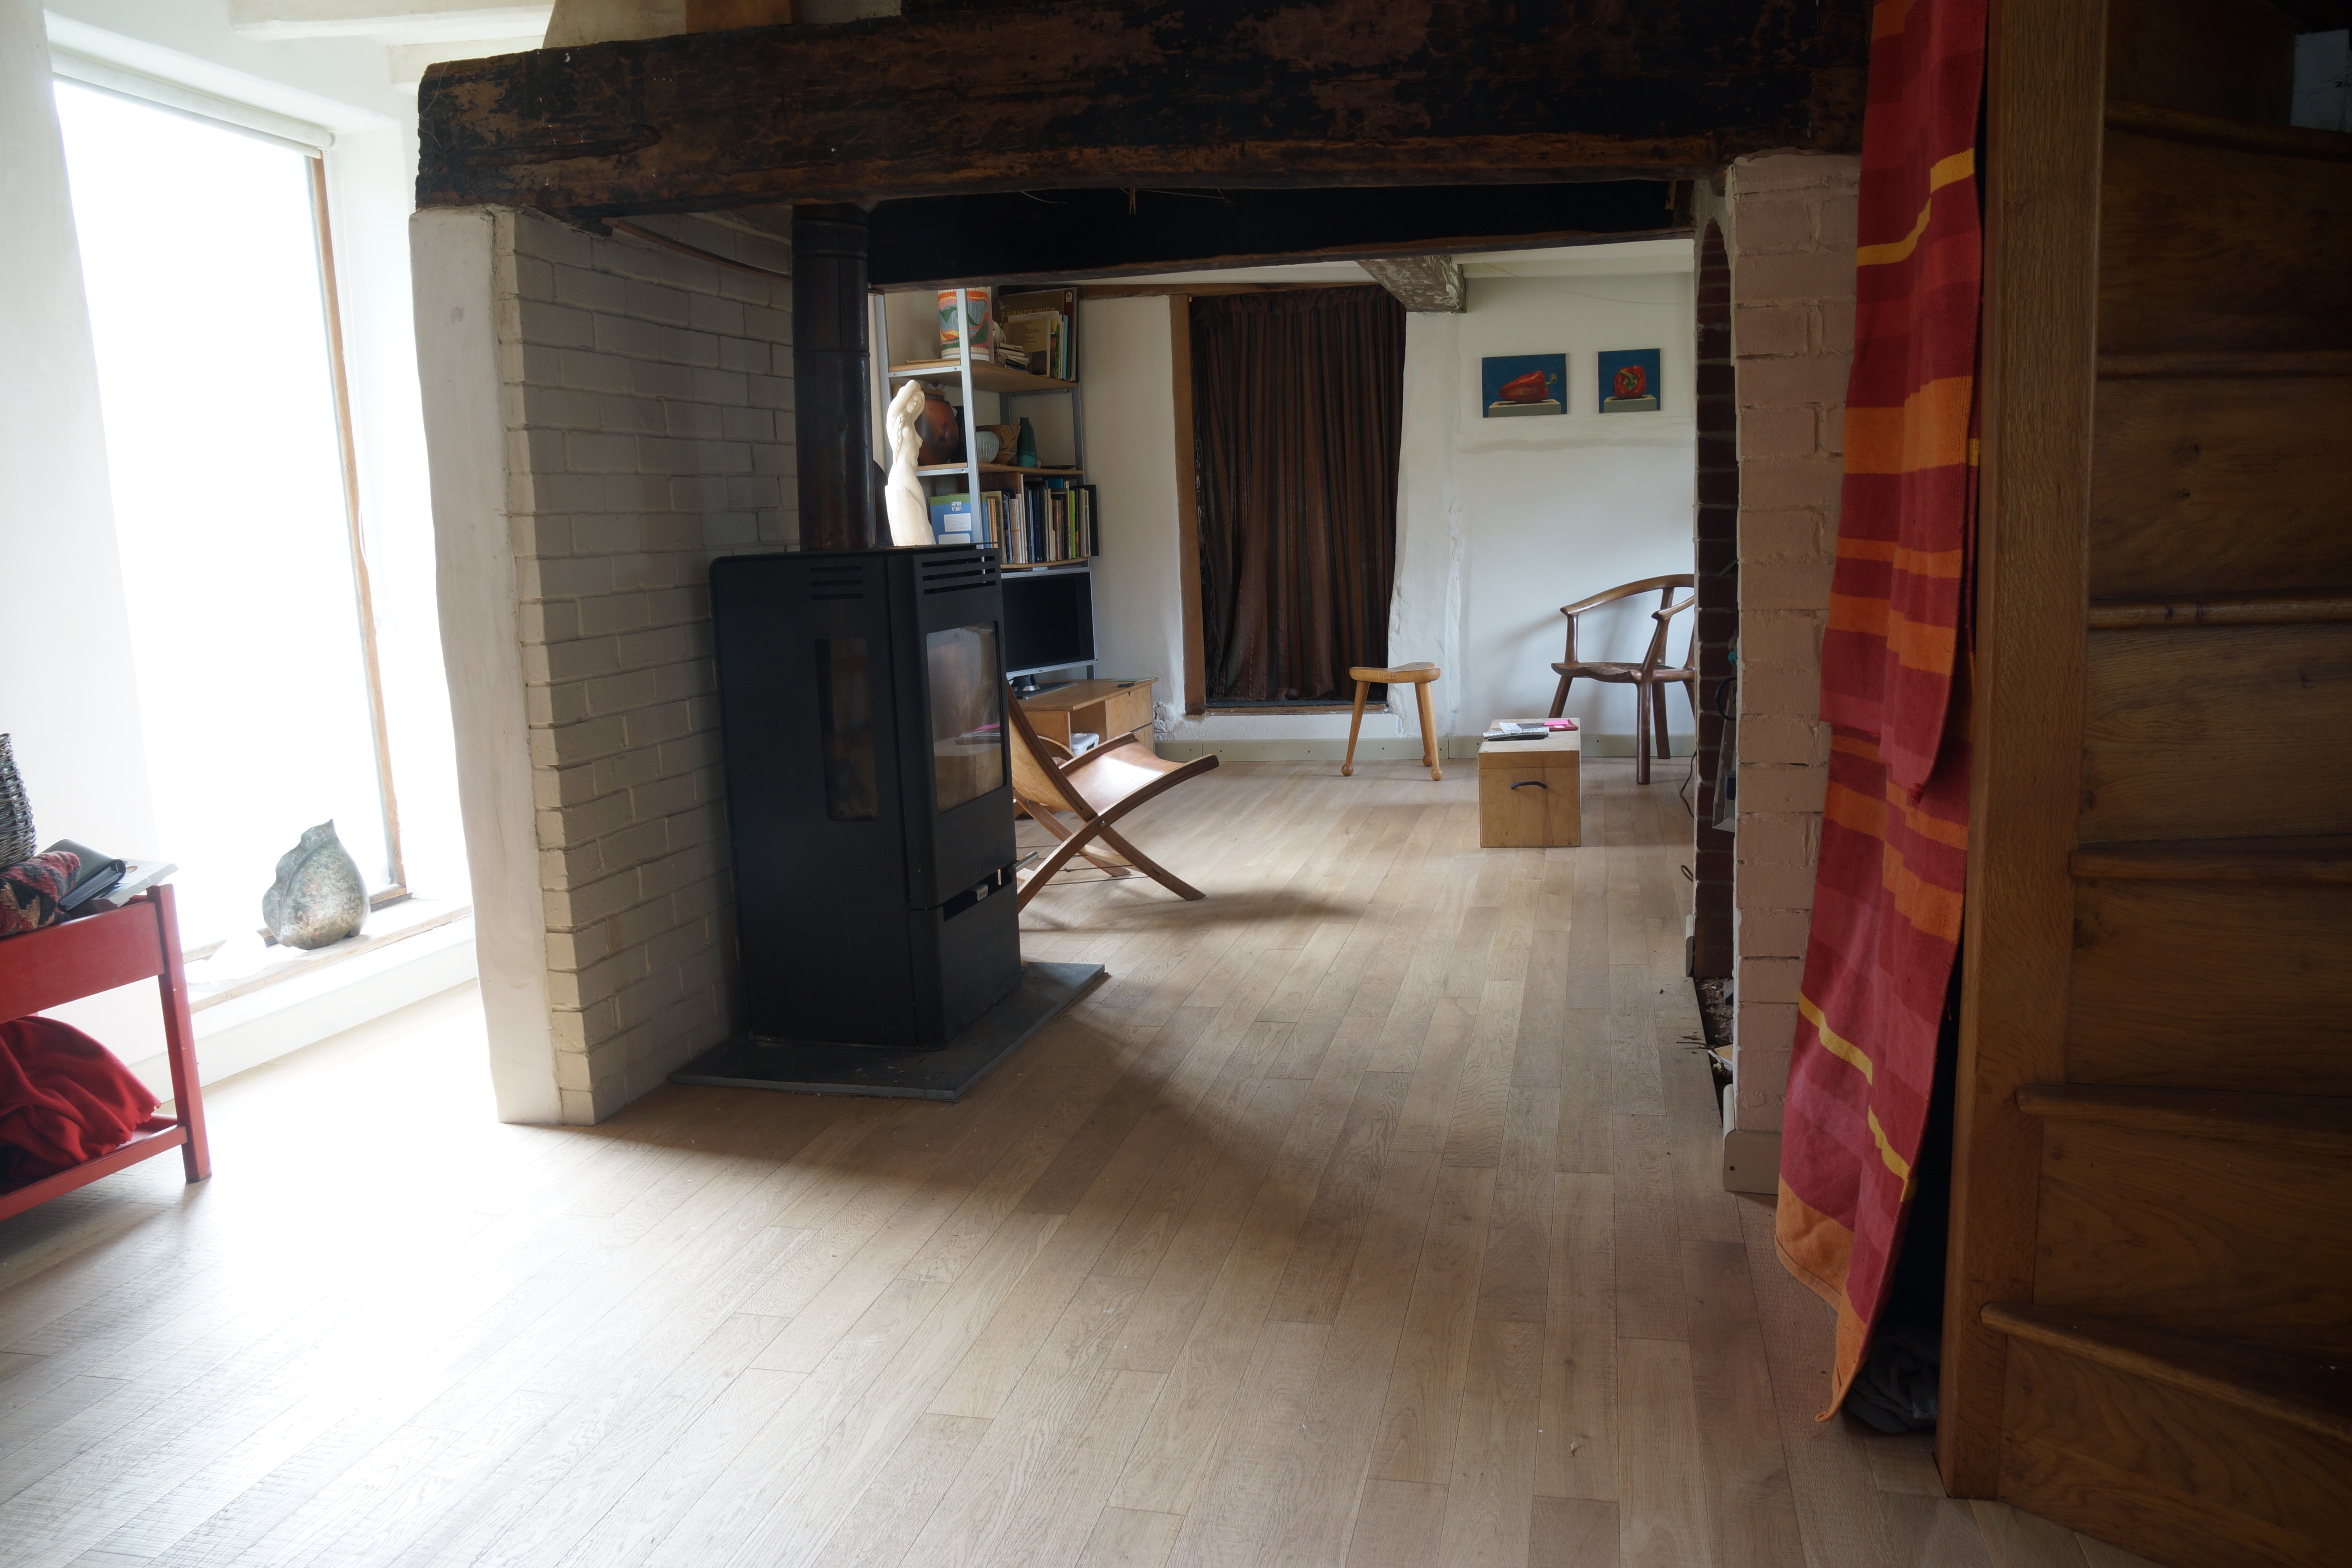 Band sawn white oak in a home with open plan living 